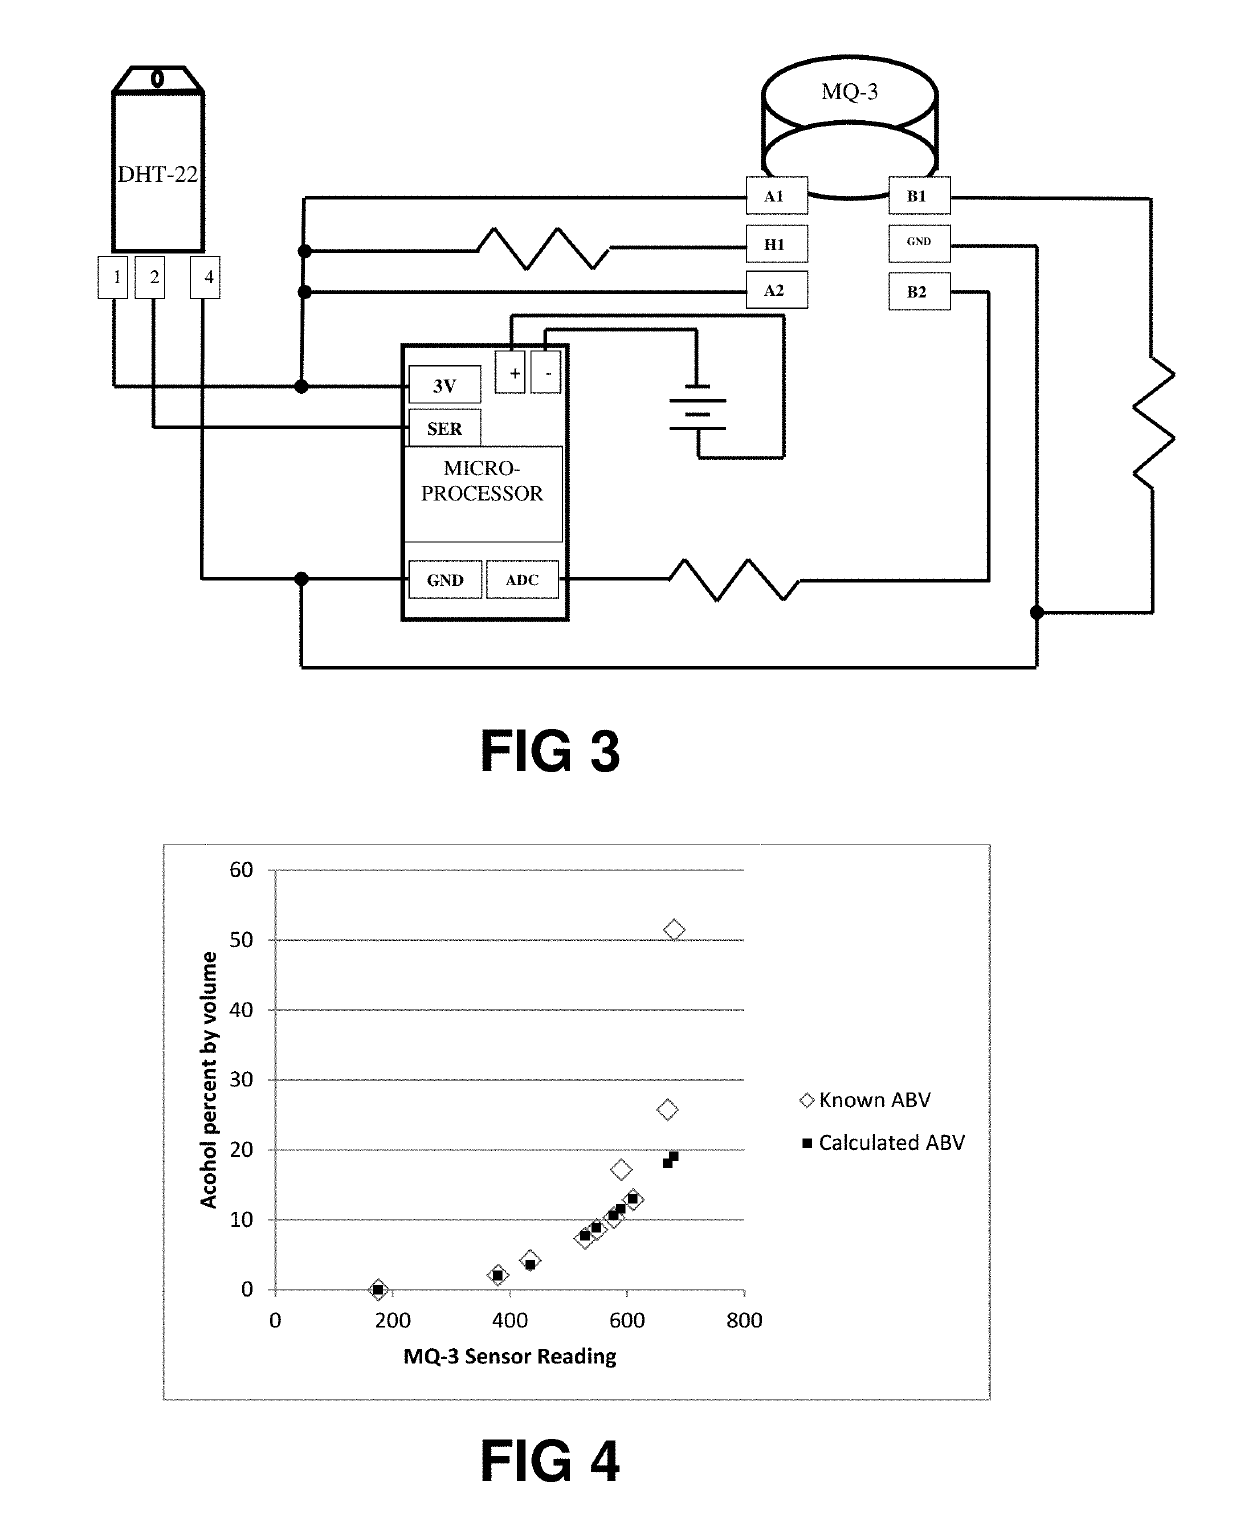 Method and Device for Estimation of Alcohol Content in Fermentation or Distillation Vessels